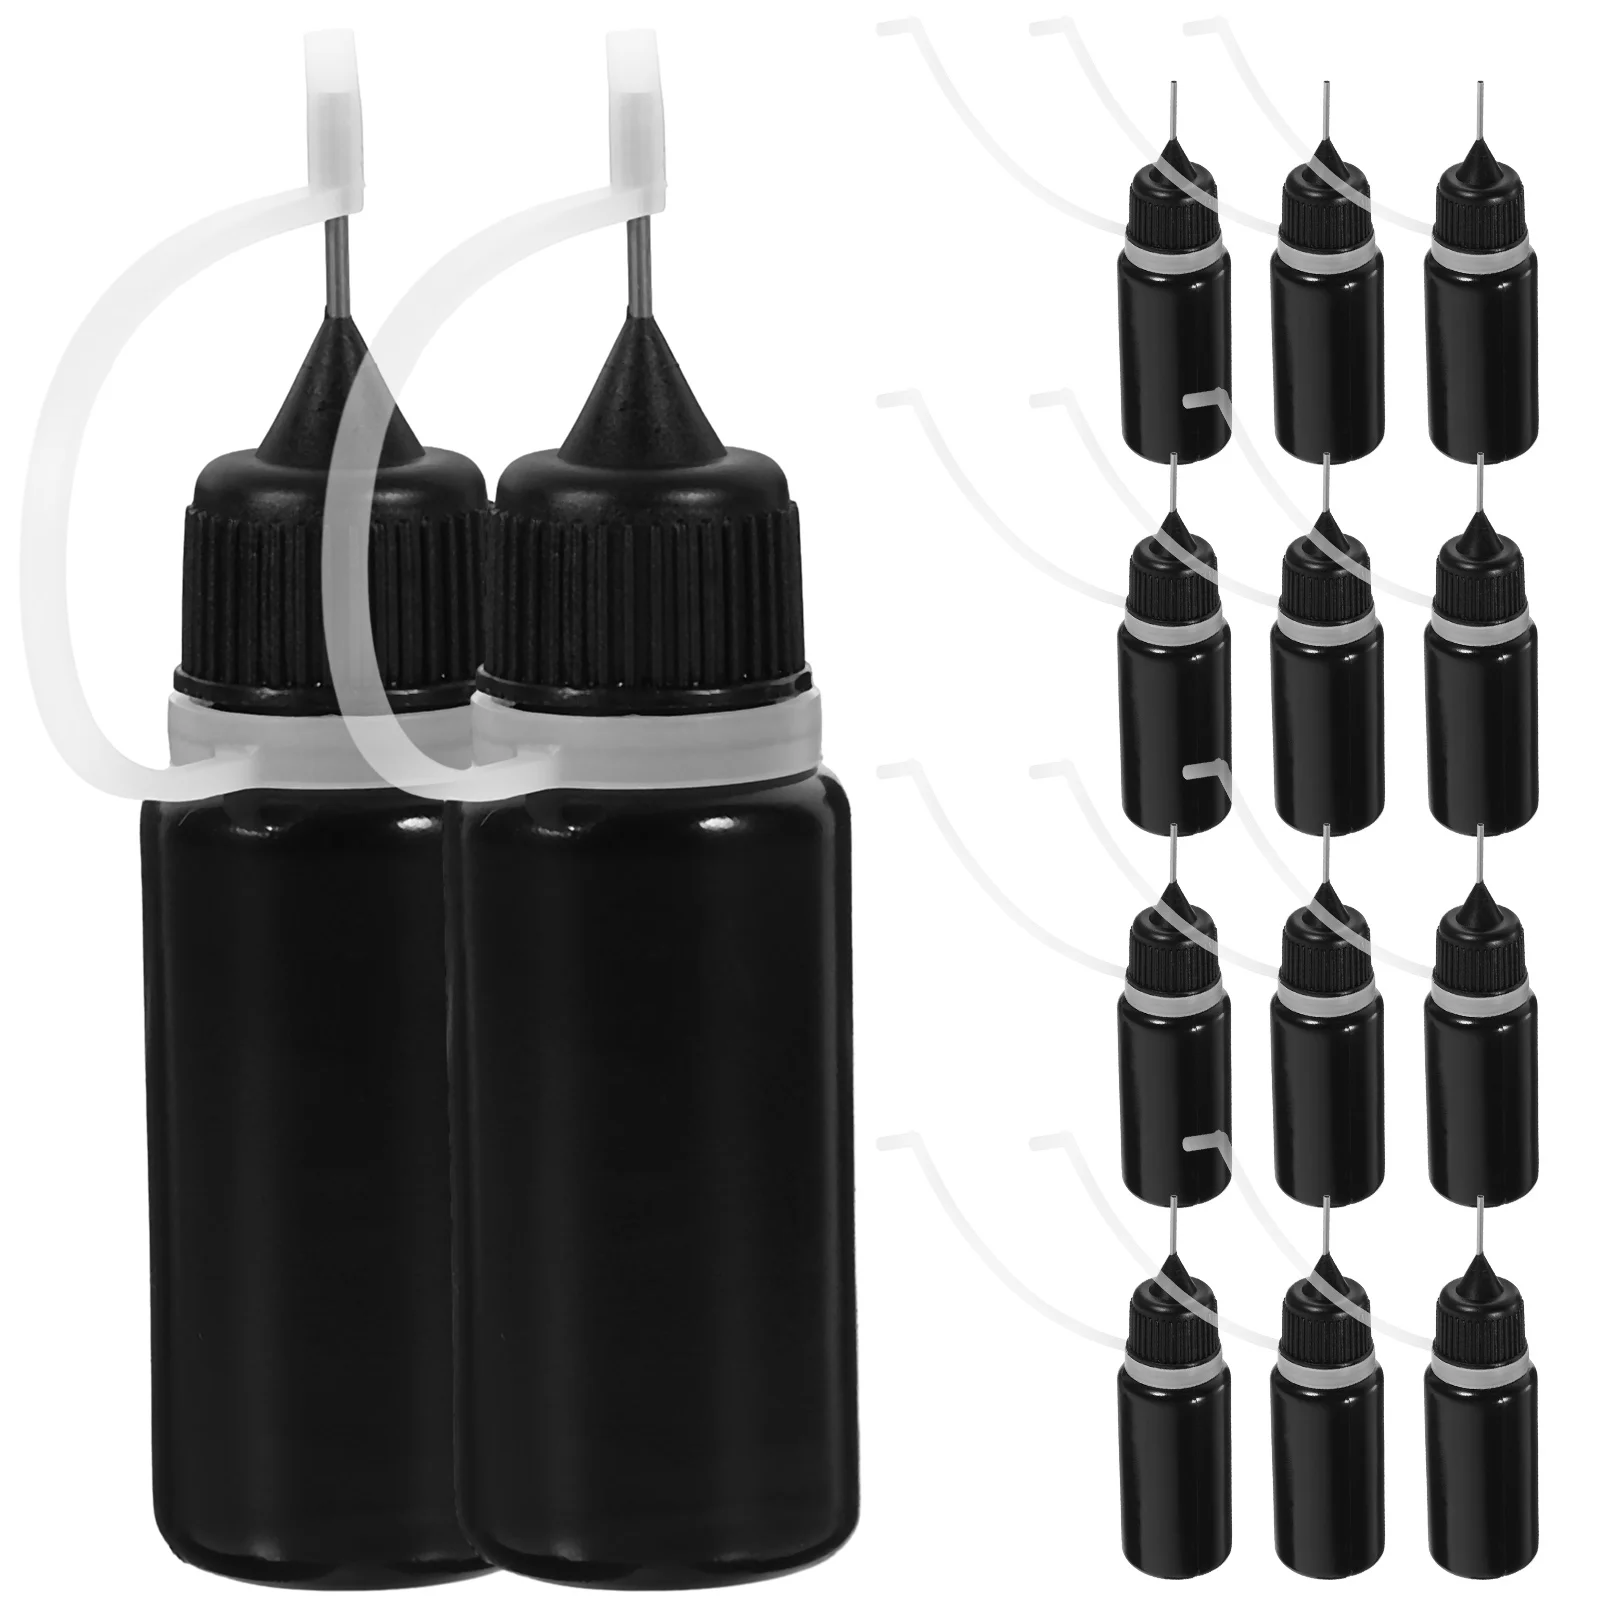 20 Pcs Bottled Squeeze Bottles Glue with Fine Tip for Liquids Needle Small Stainless Steel Precision Applicator Dispenser waterproof digital instant read thermometer with 9 8 probe for cooking food candy bbq grills liquids dropship